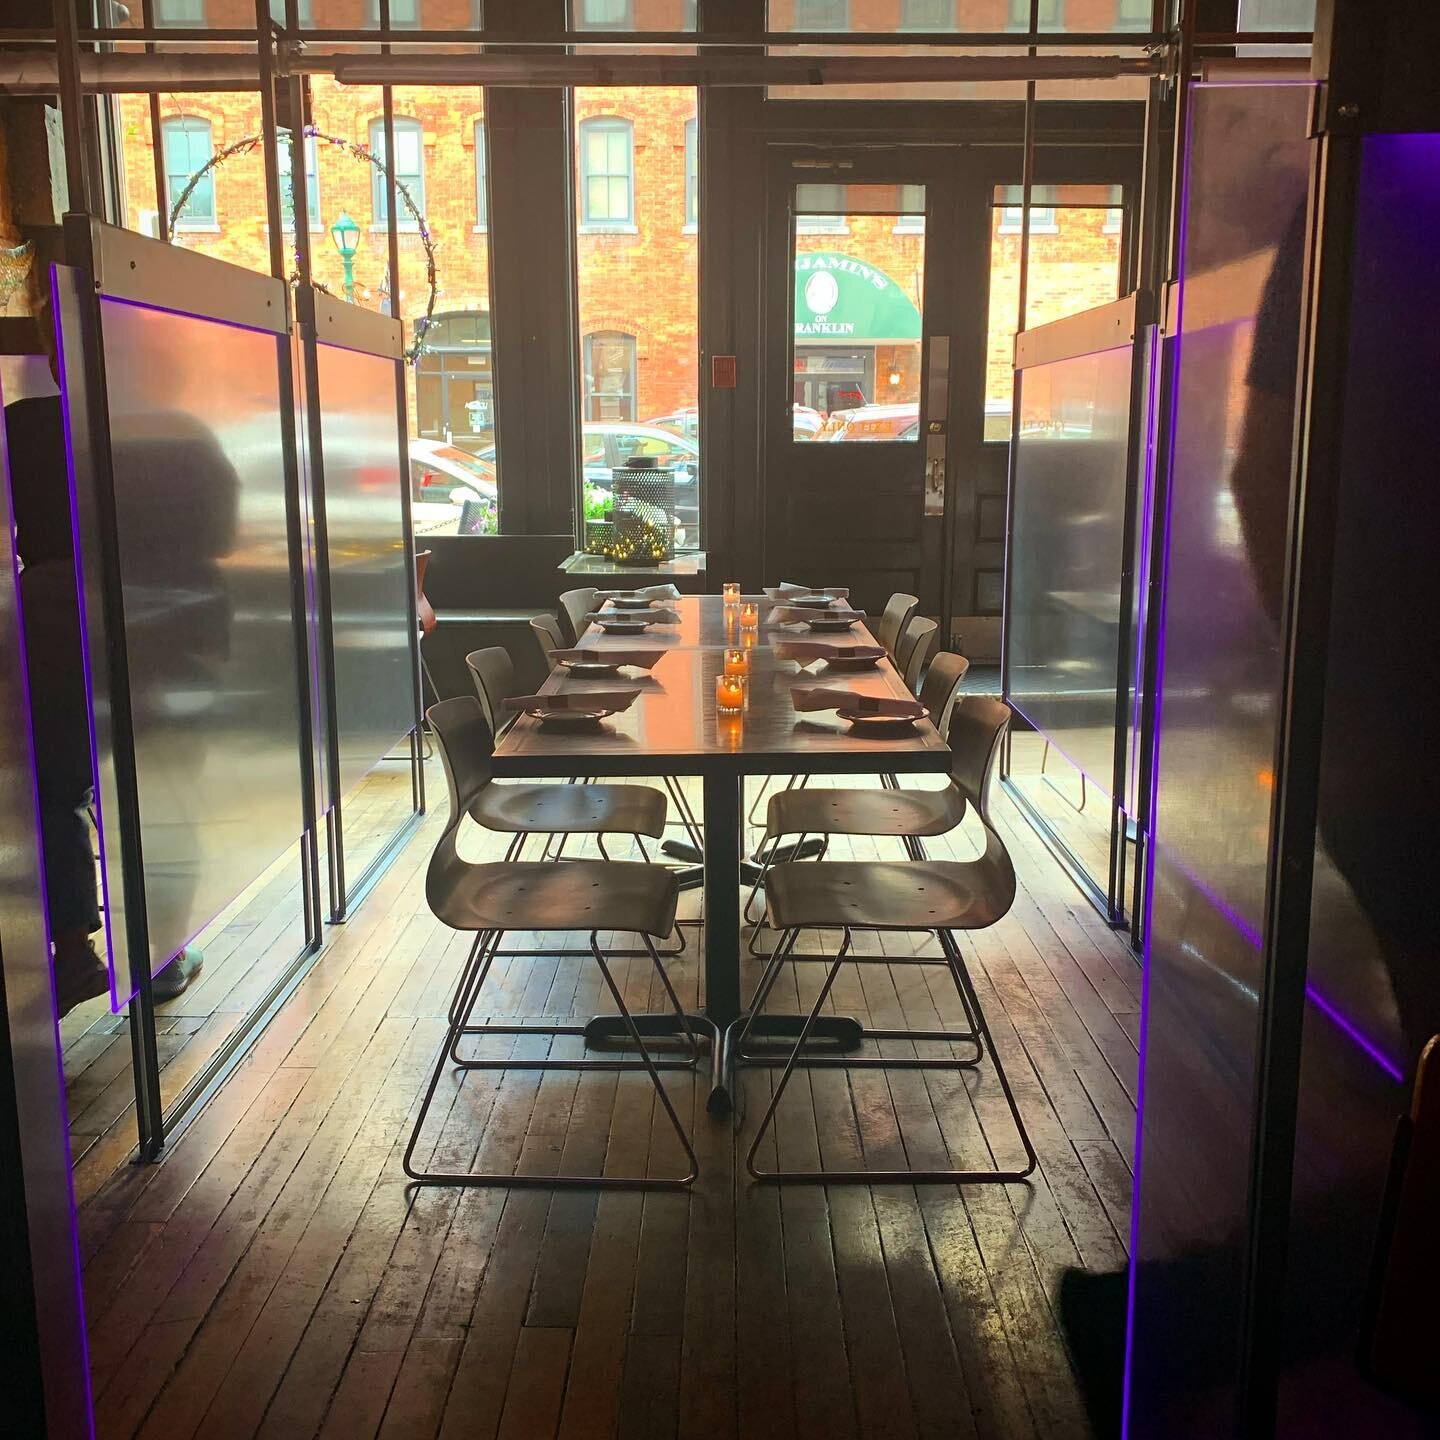 just an update from your friends at pastabilities ✨ 
.
.
in our restaurant you will still see social distancing efforts in place &mdash; including new and improved dividers in our front dining room. Silver lining - they really create a cozy, intimate